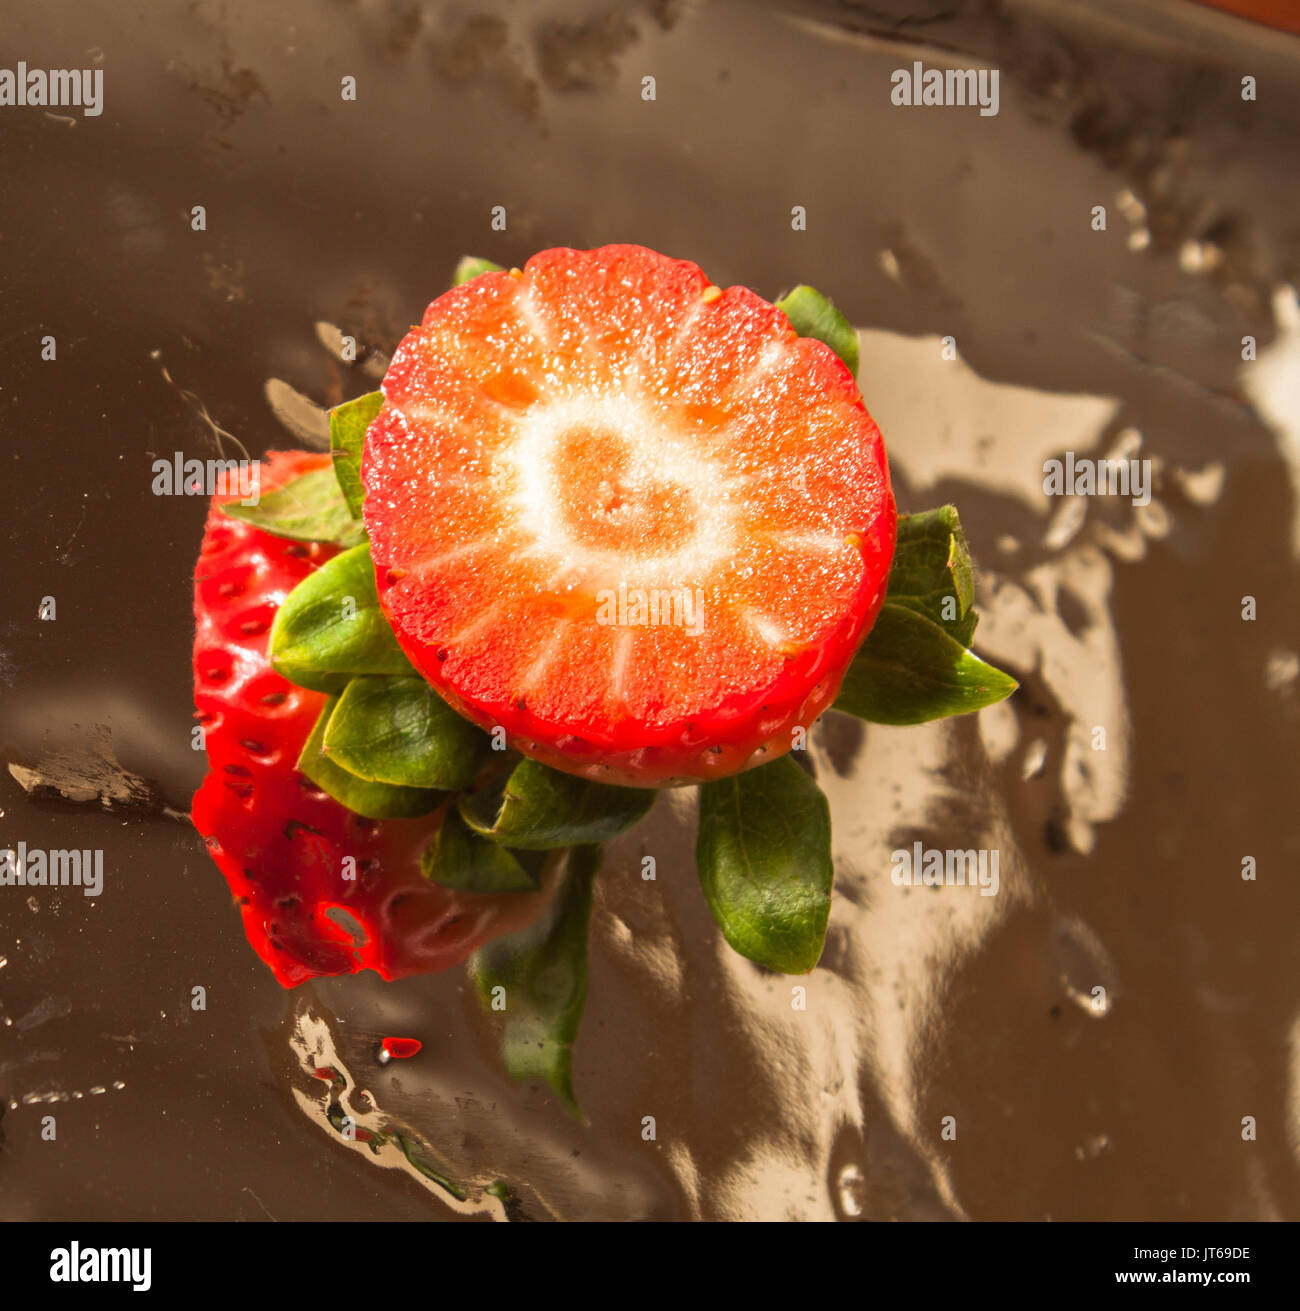 Strawberry slice with a heart shape inside in a bright mirror surface as healthy life and food concept Stock Photo